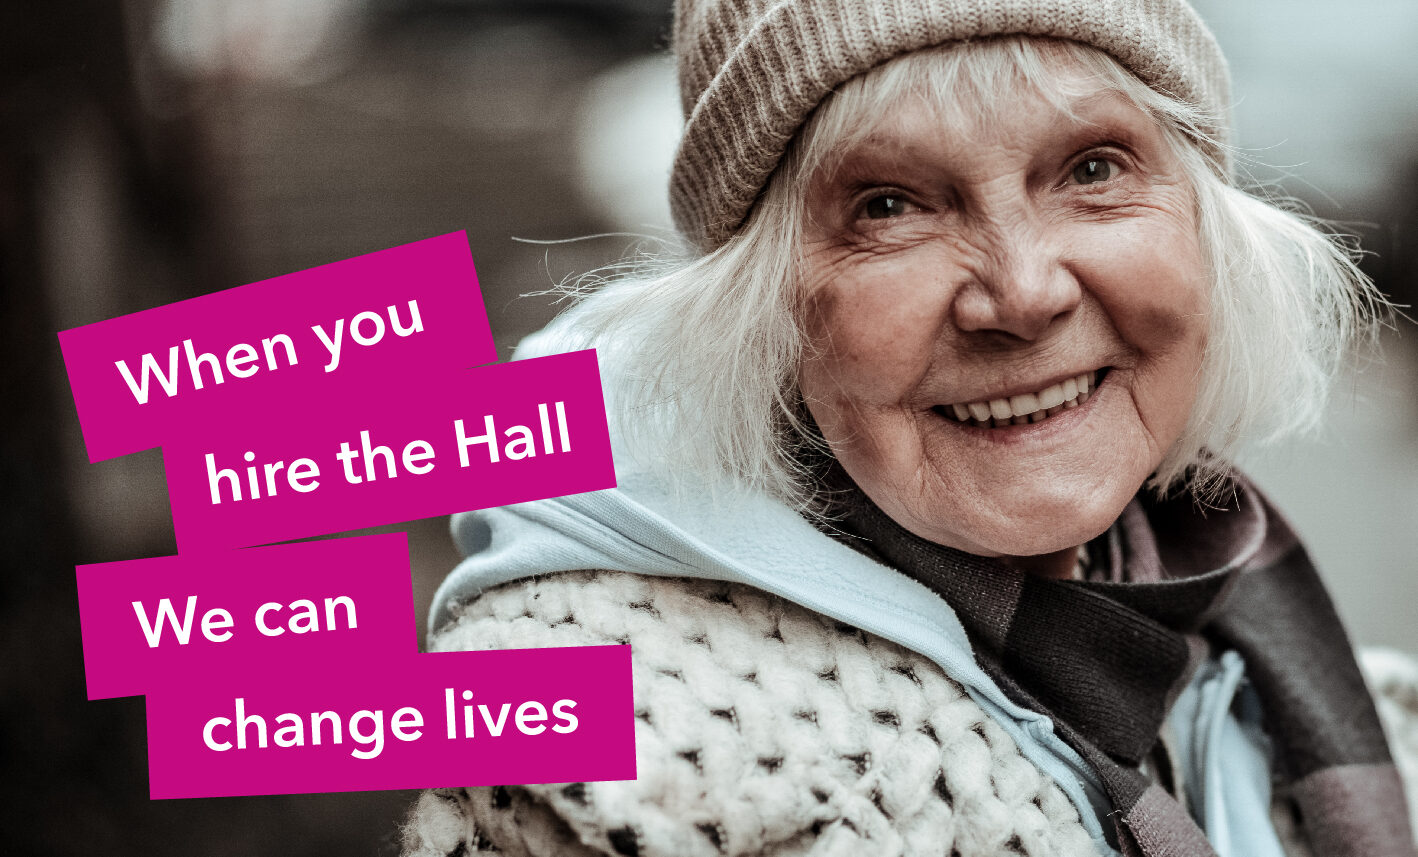 When you hire the Hall, we can change lives